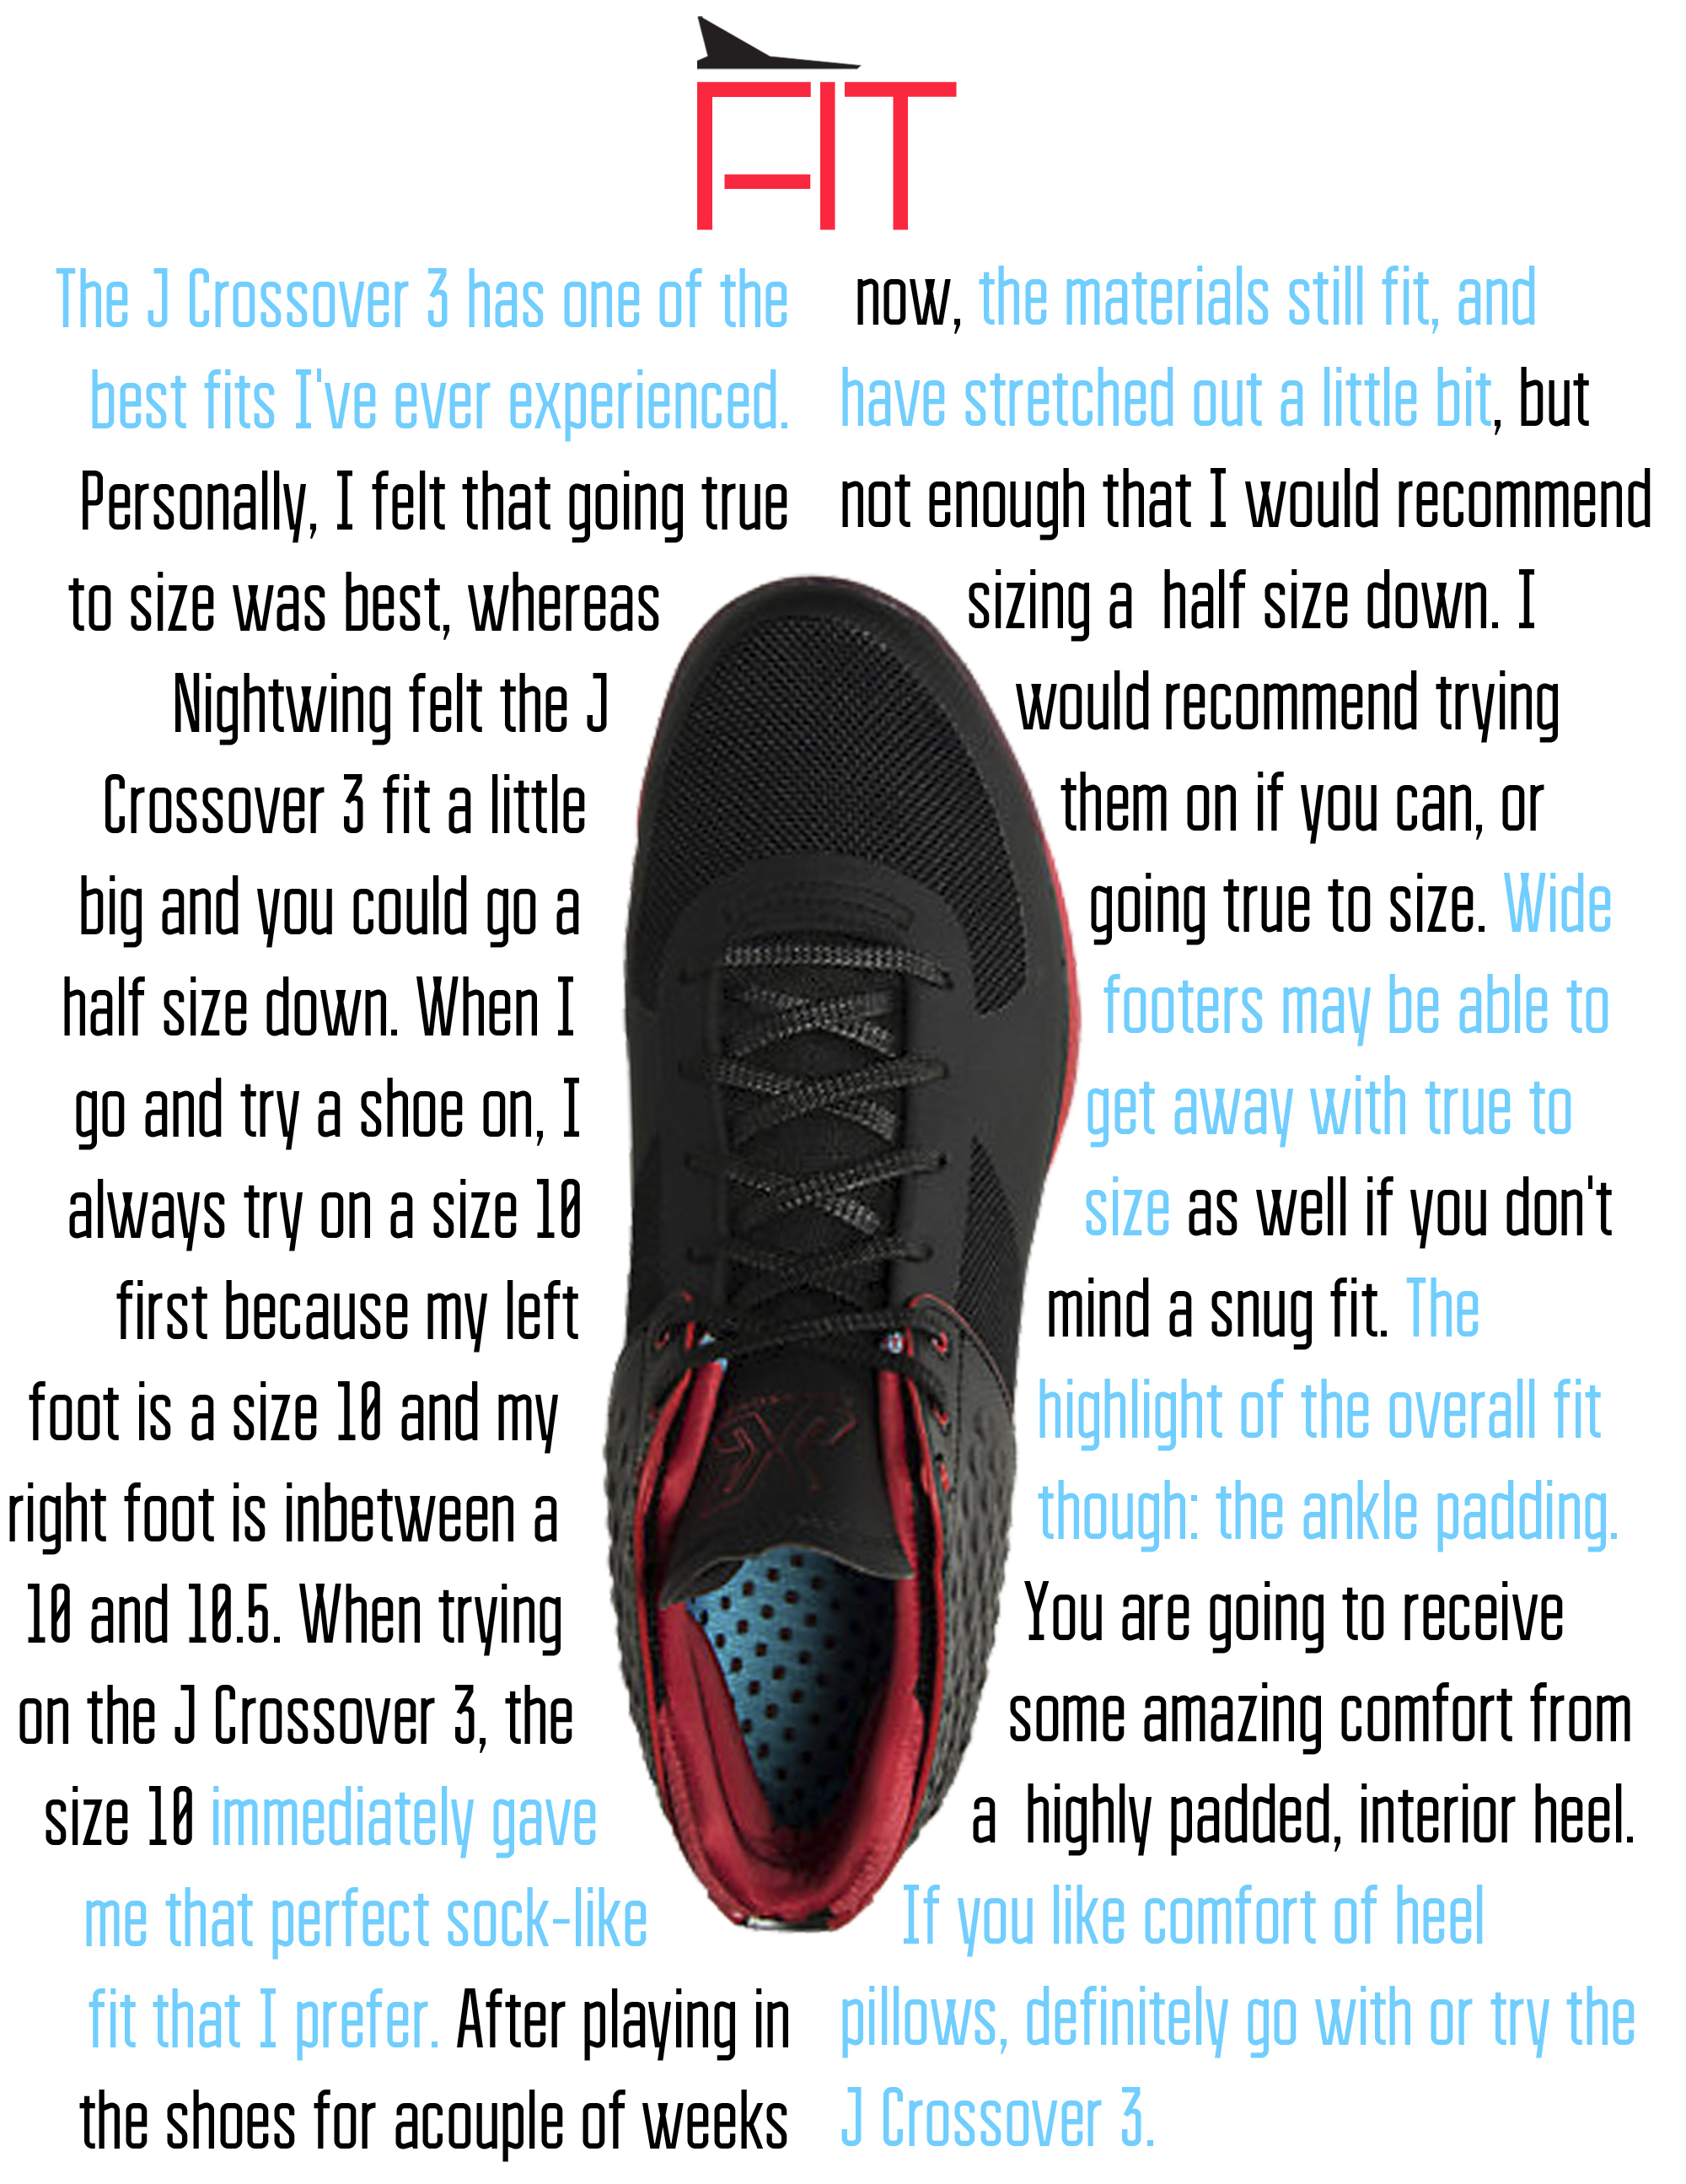 J Crossover 3 - Fit